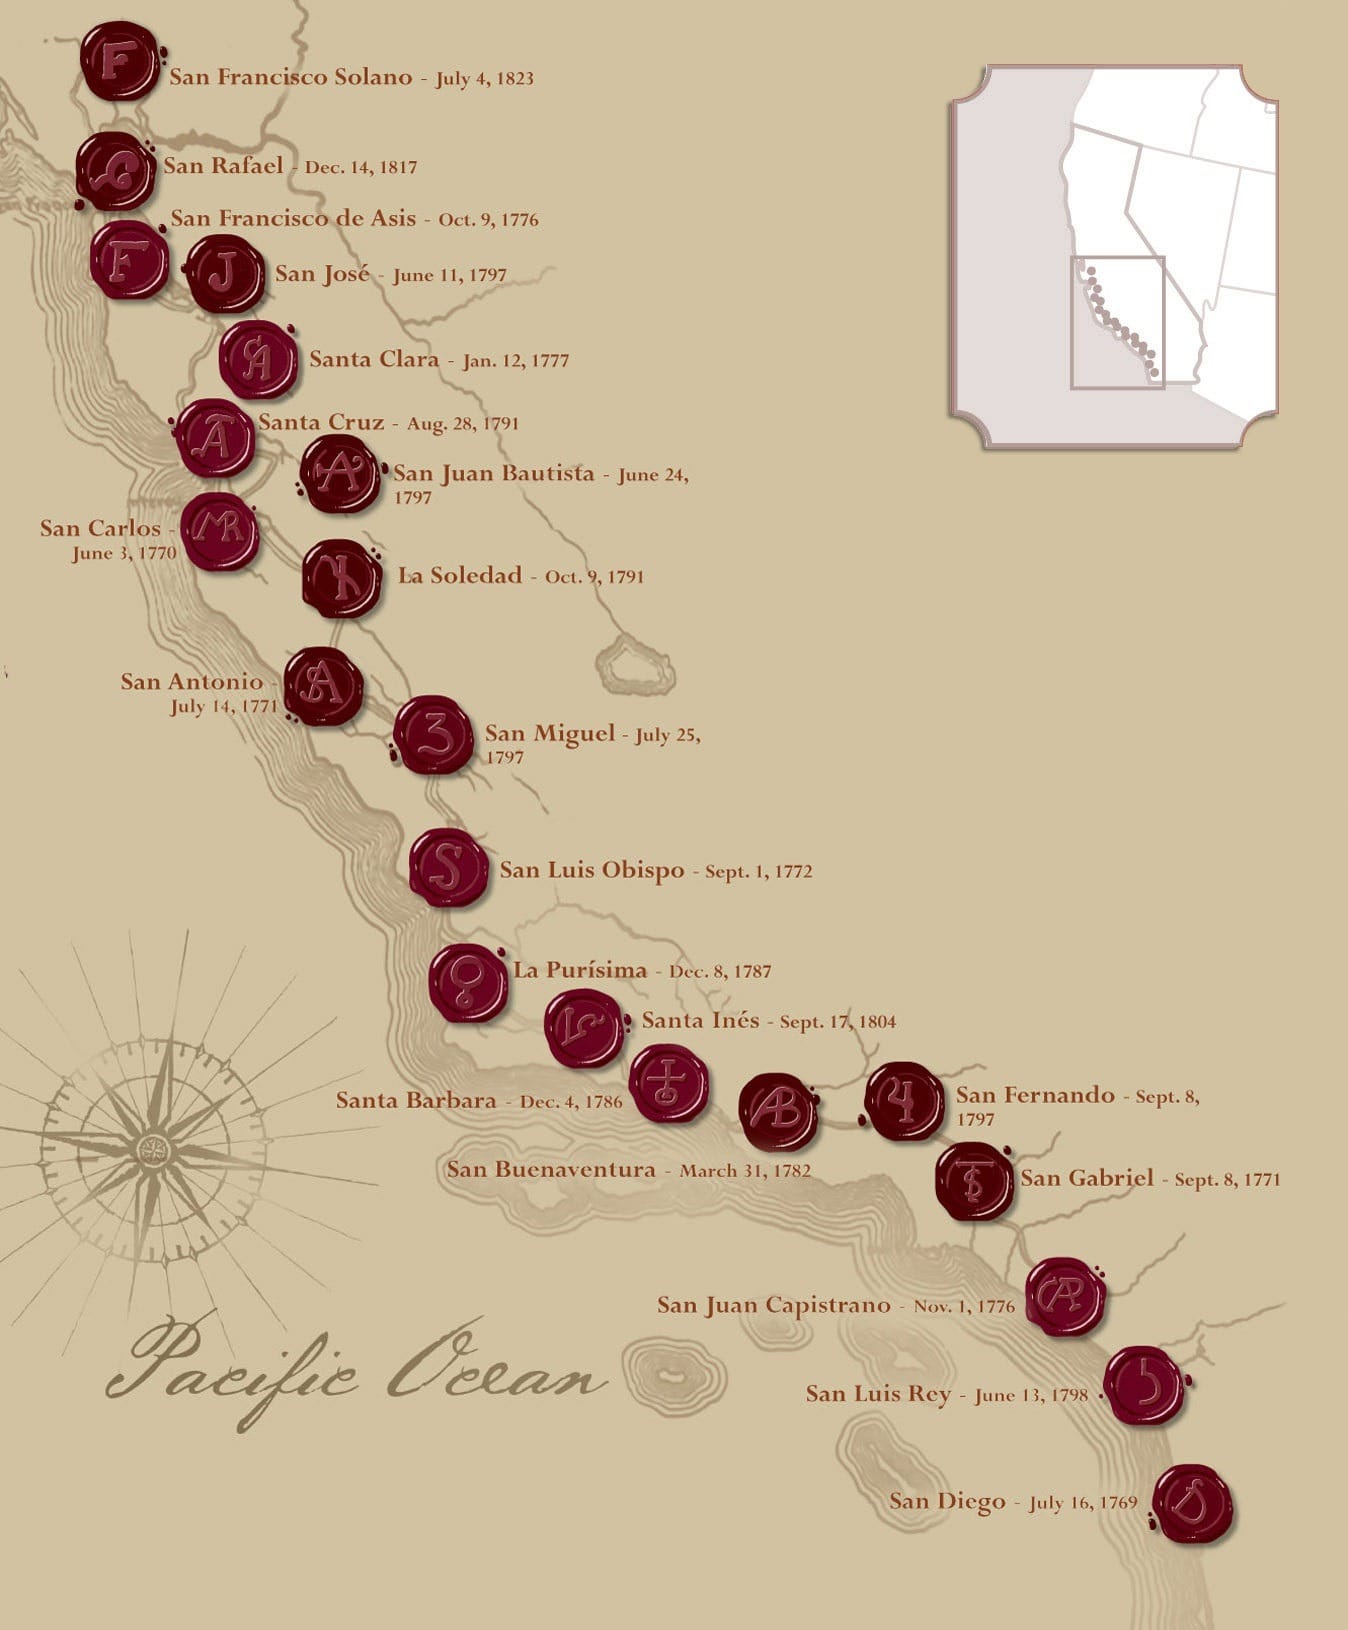 California Missions Timeline